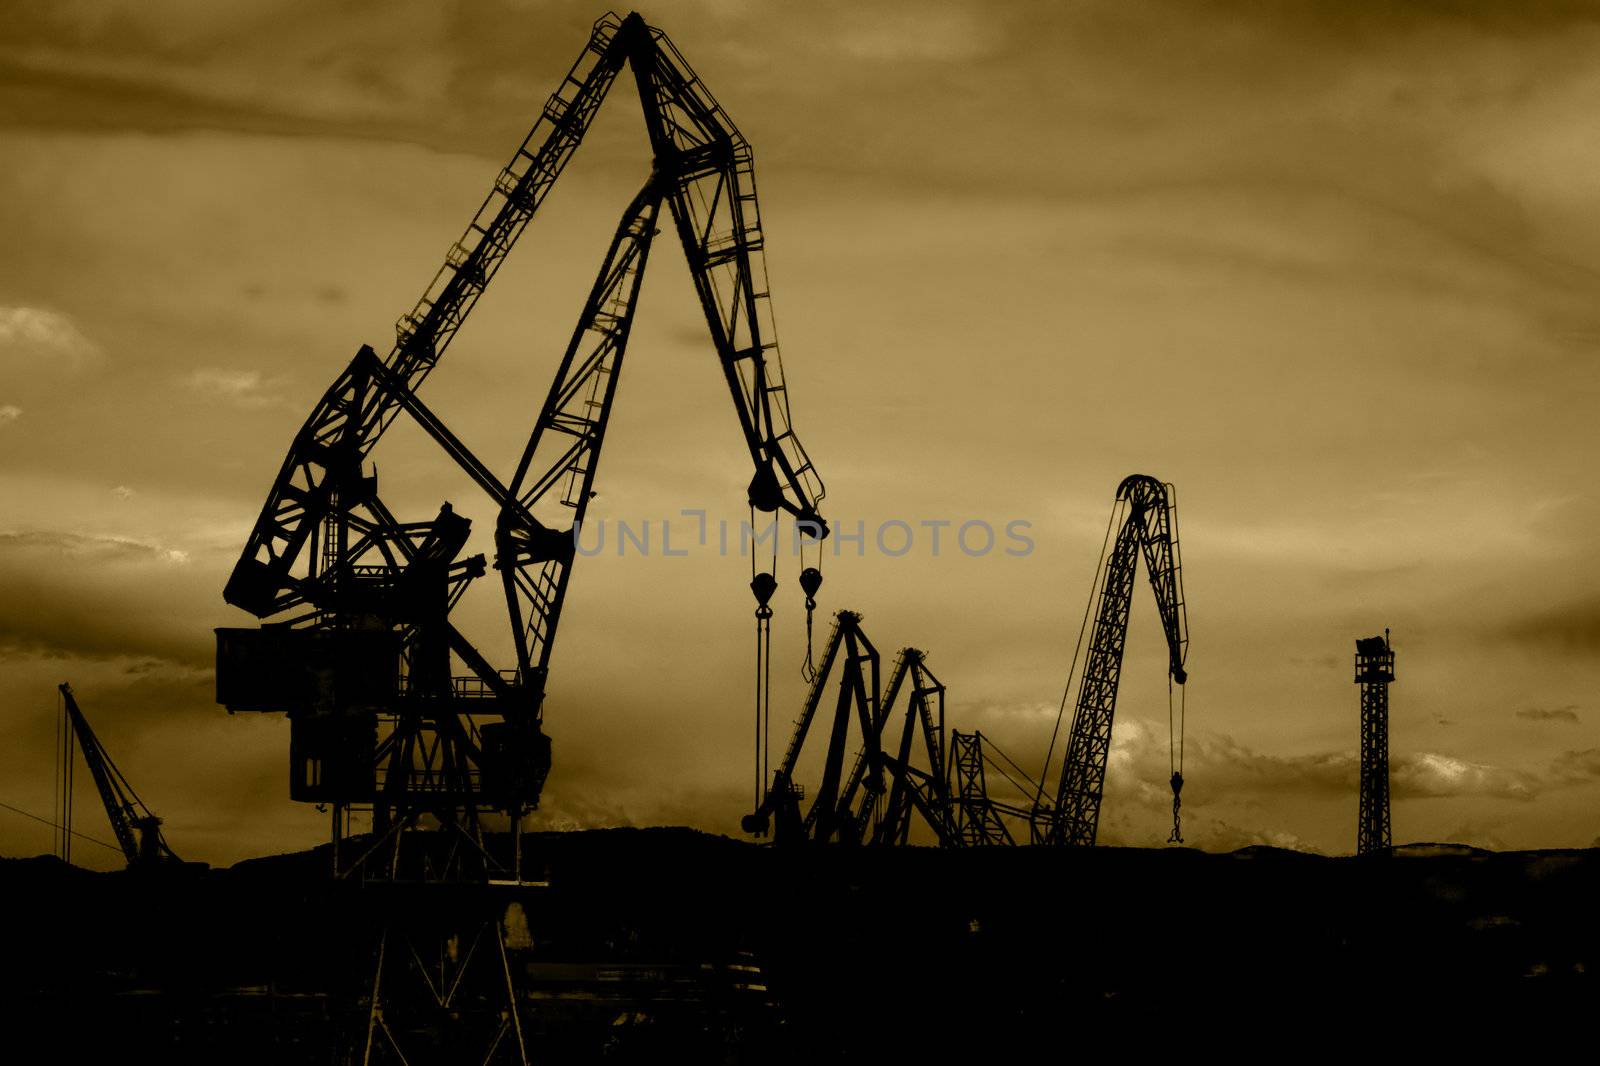 Silhouettes of cranes against a cloudy sky